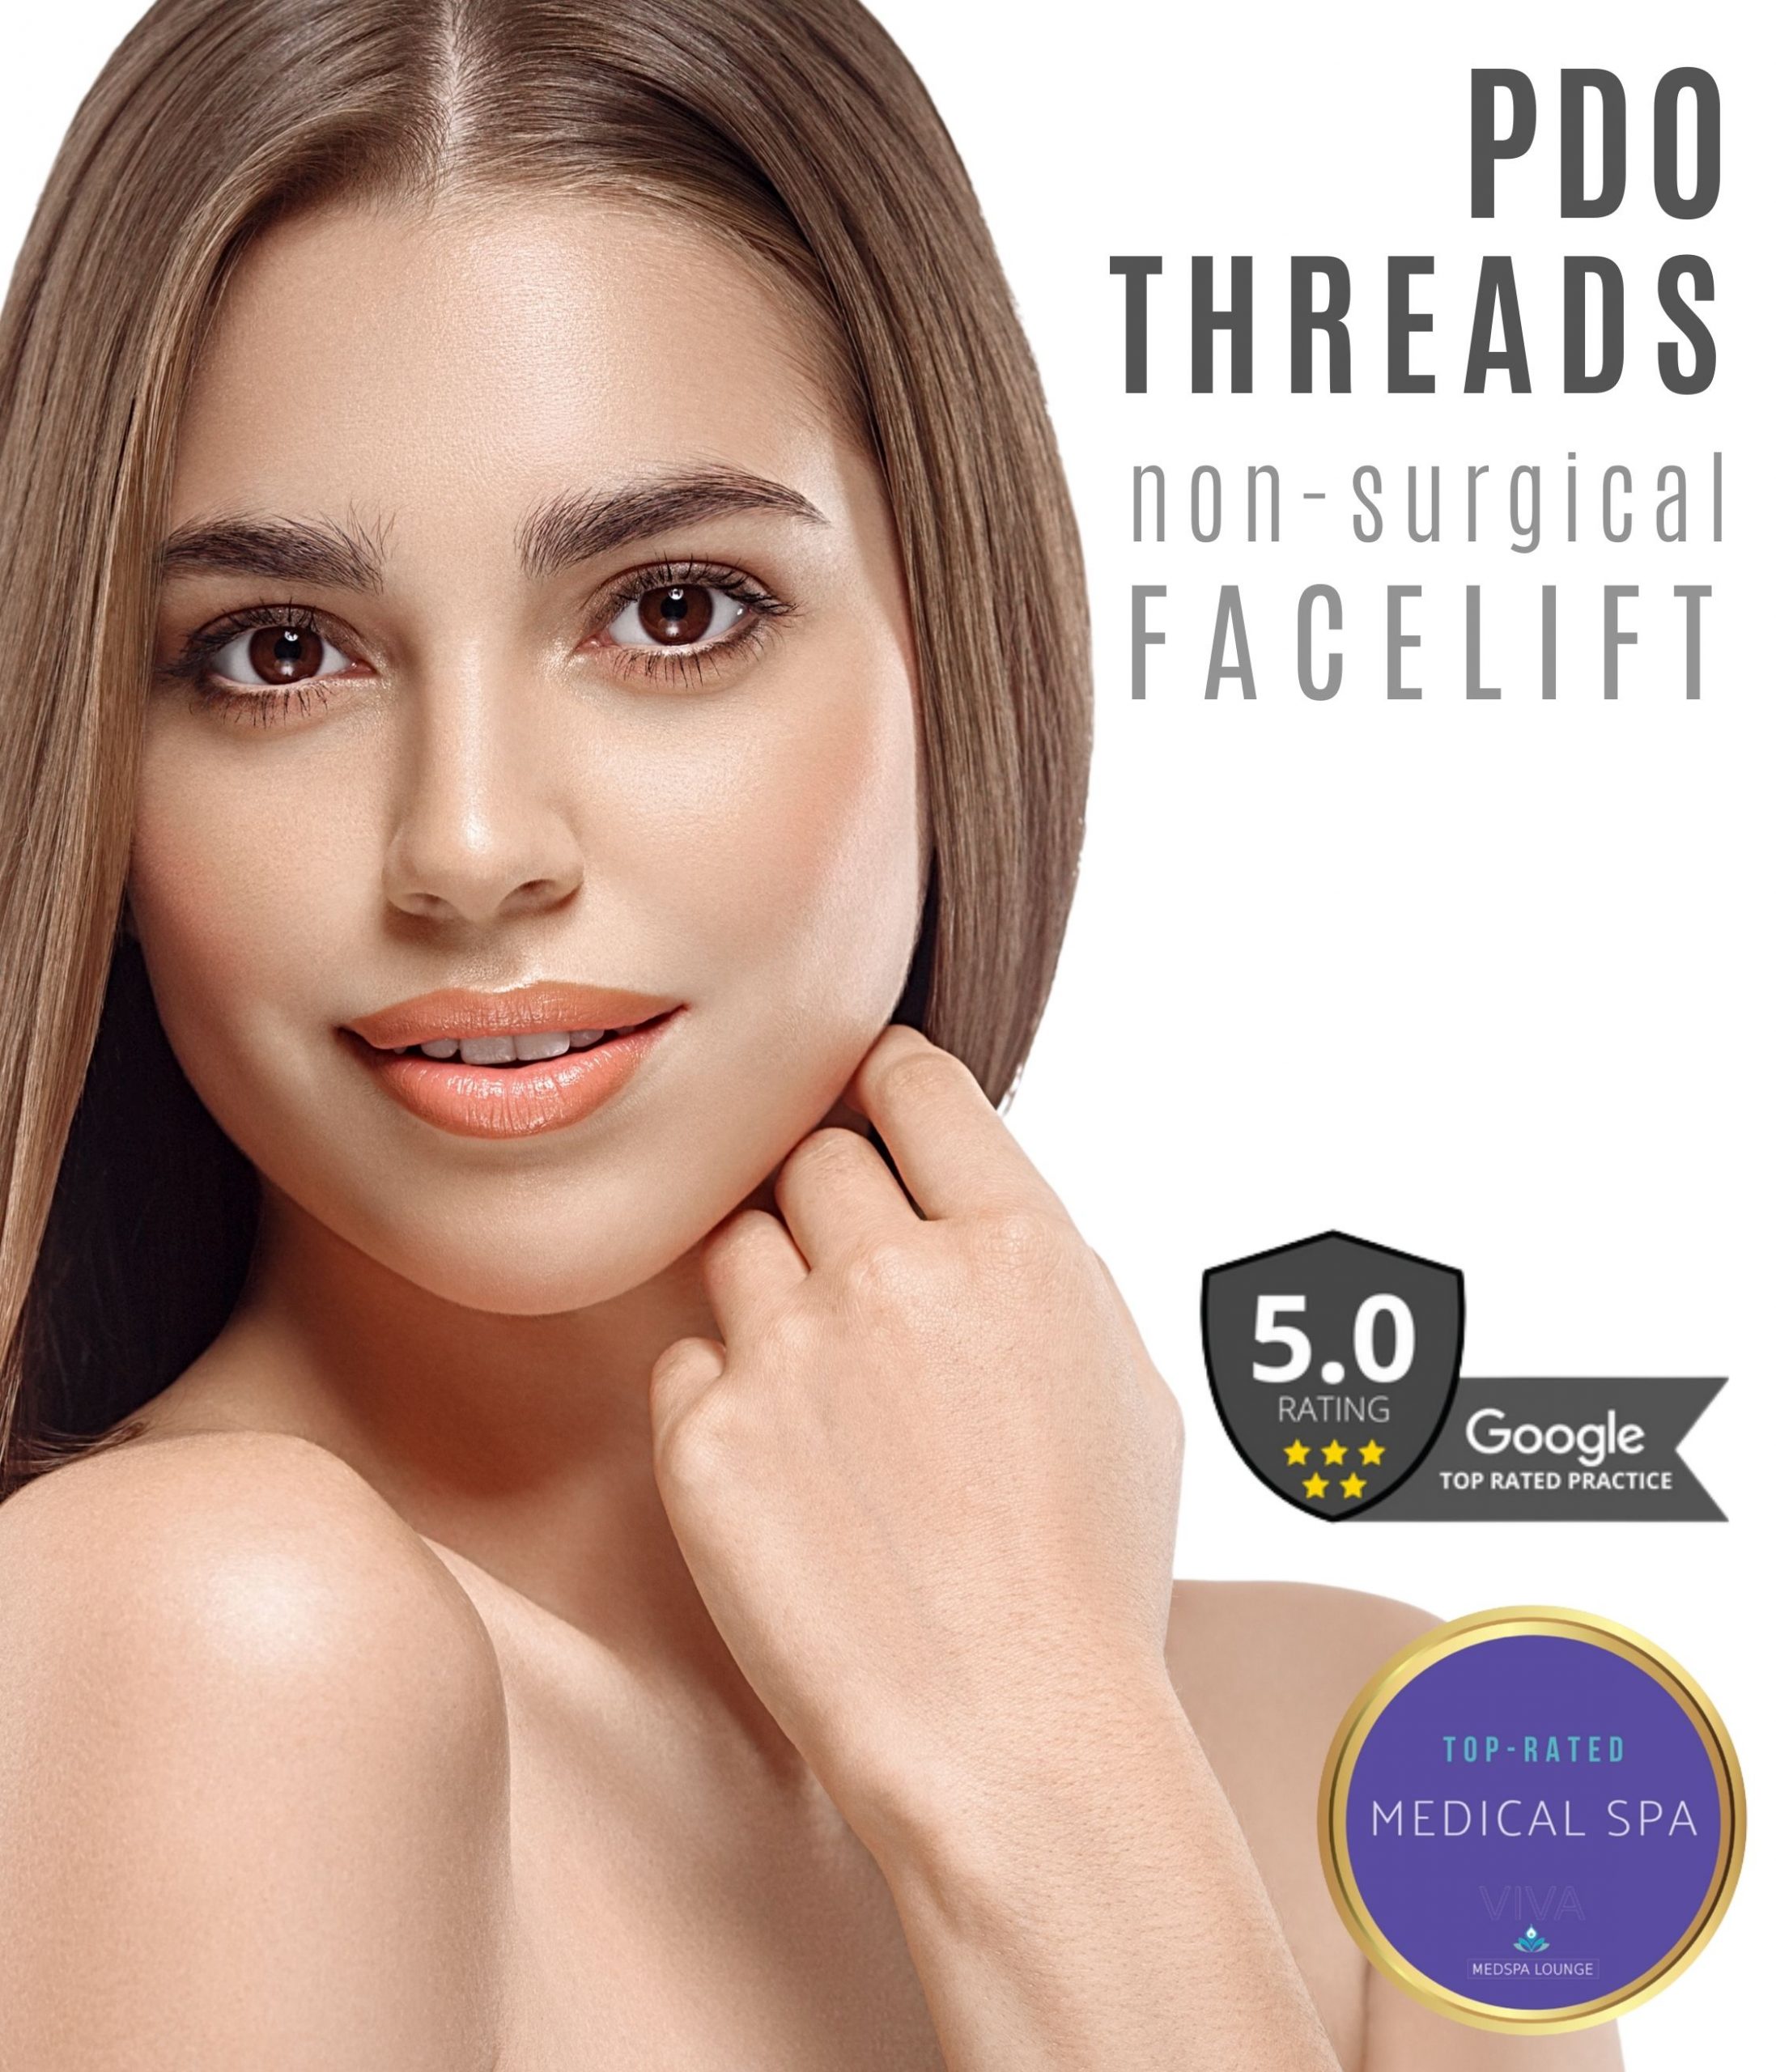 woman with youthful skin promoting PDO Threads